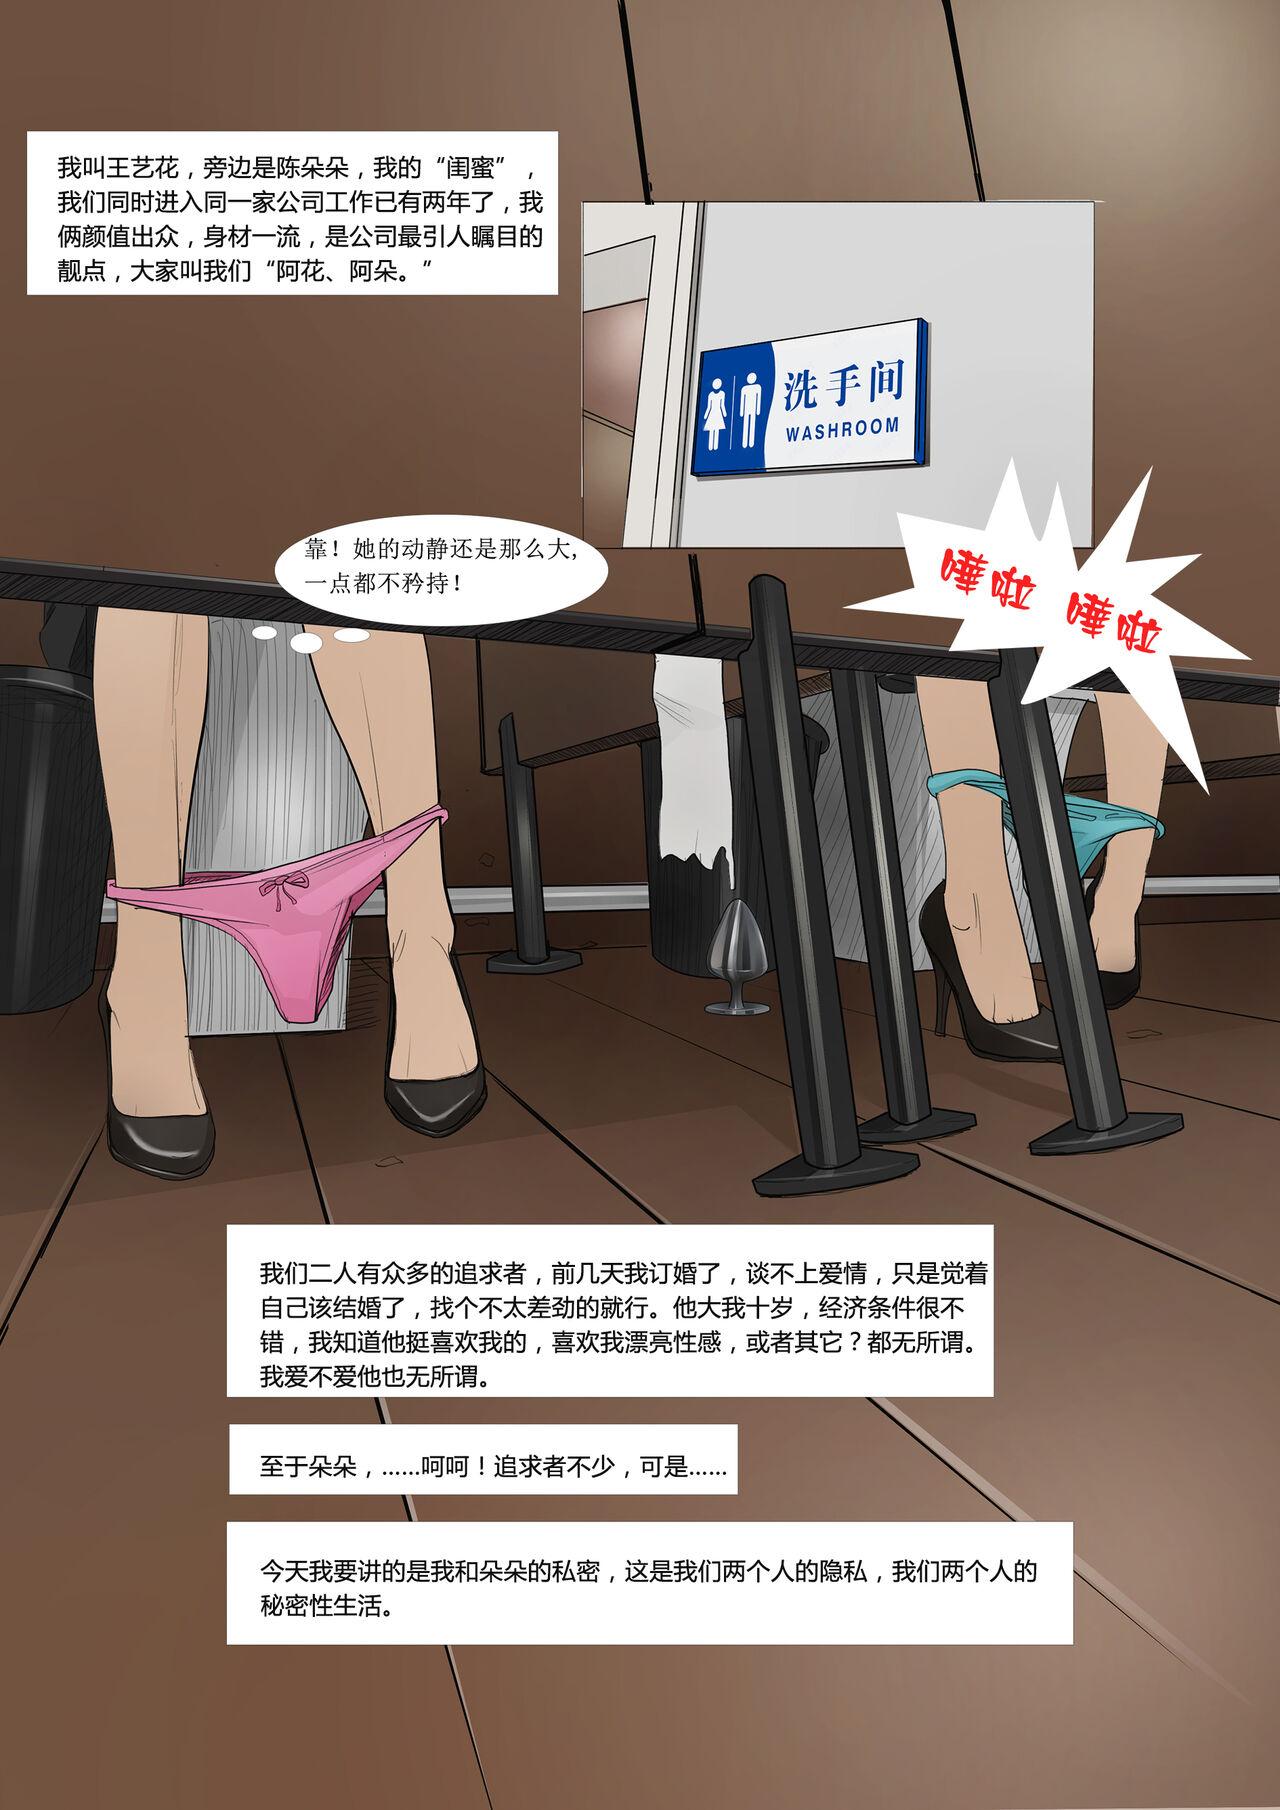 Masterbation Foryou밢䡷һ A hua and A duo 1 Chinese Magrinha - Page 2